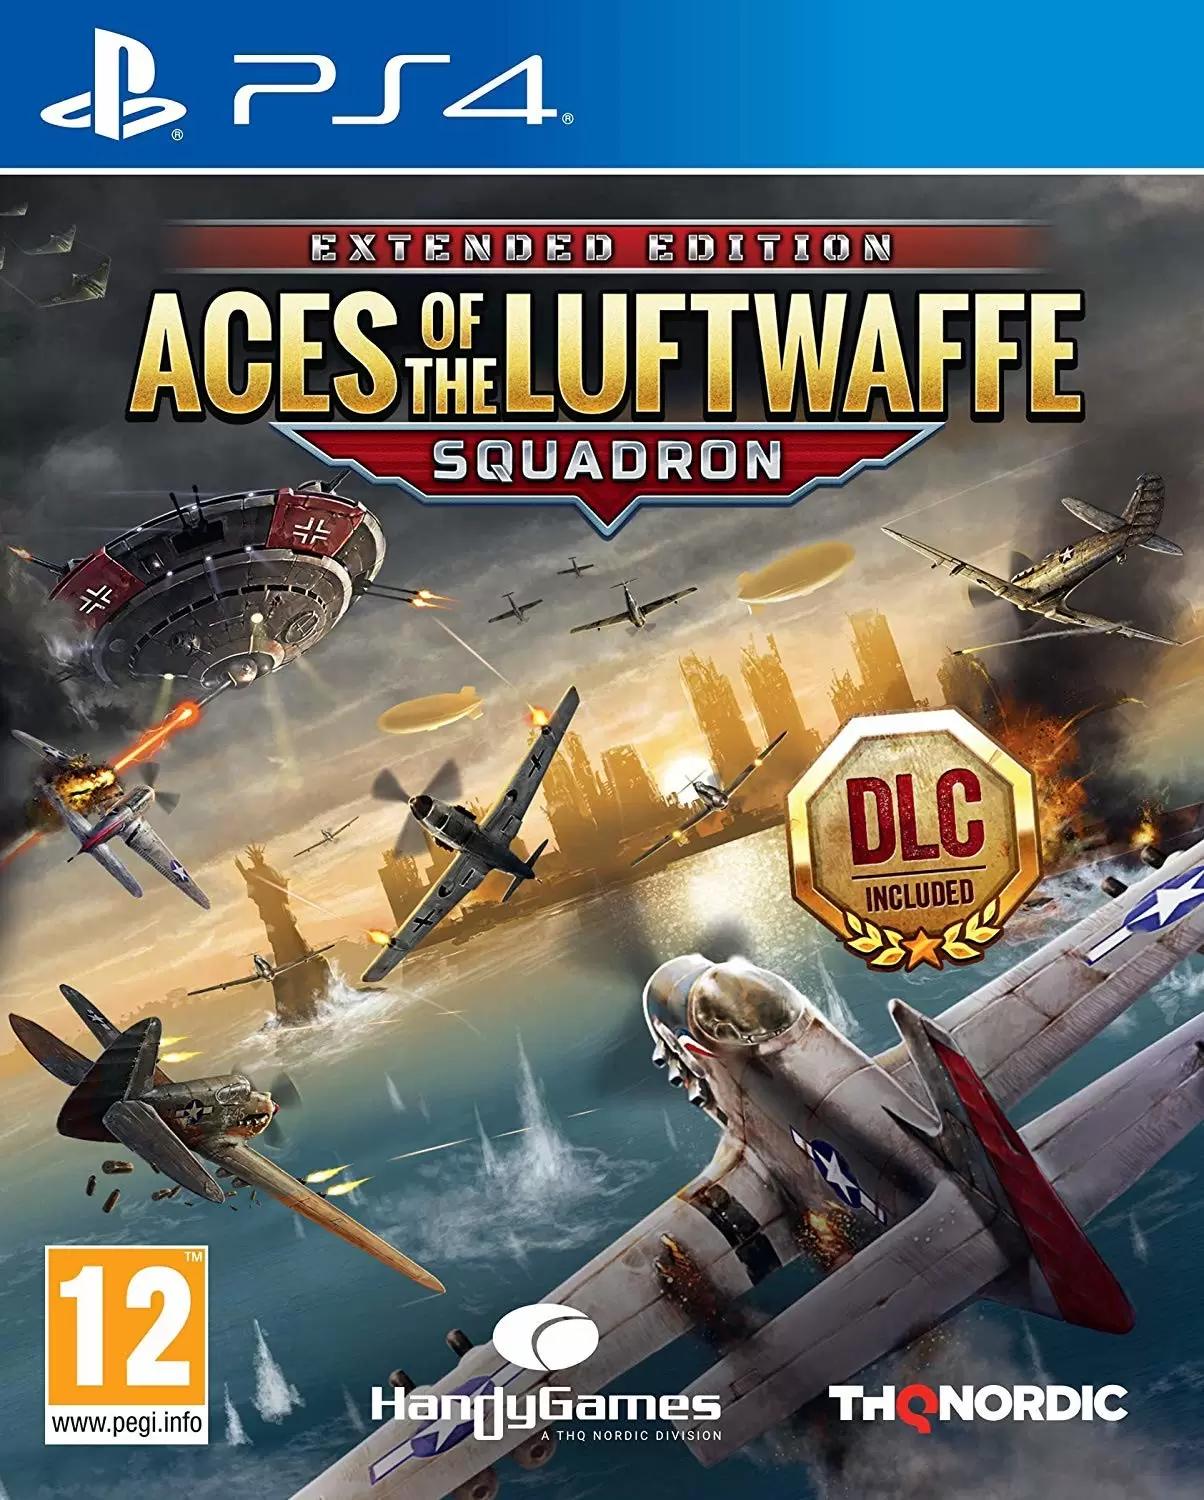 PS4 Games - Aces Of The Luftwaffe - Squadron Edition